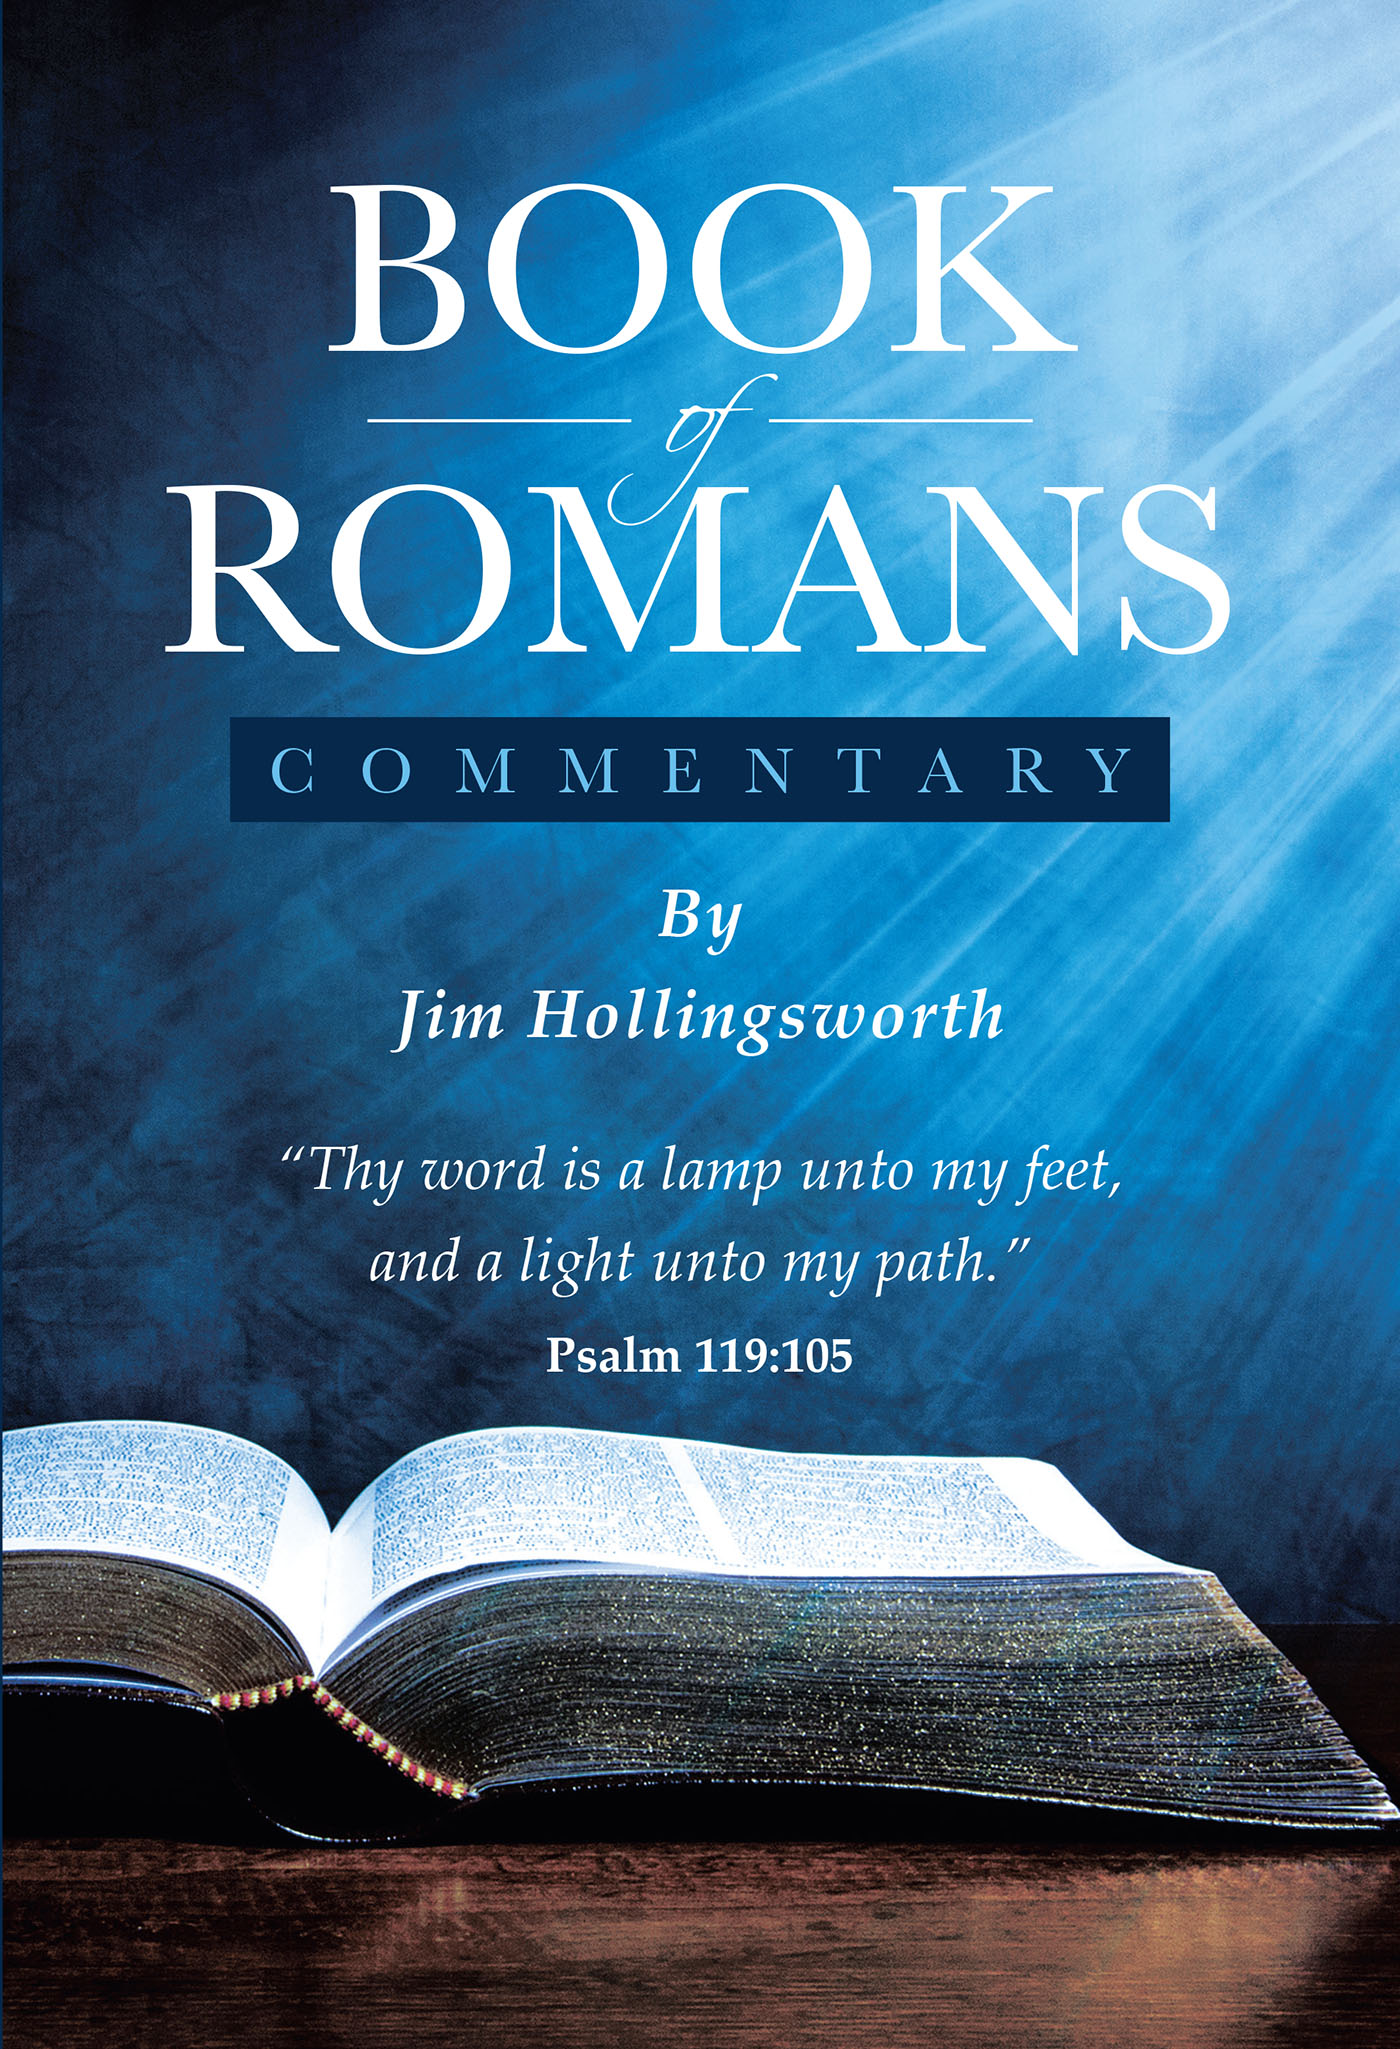 Author Jim Hollingsworth’s New Book, "Book of Romans: Commentary," is a Profound Discussion That Reveals How Romans is the Most Foundational Book of the New Testament